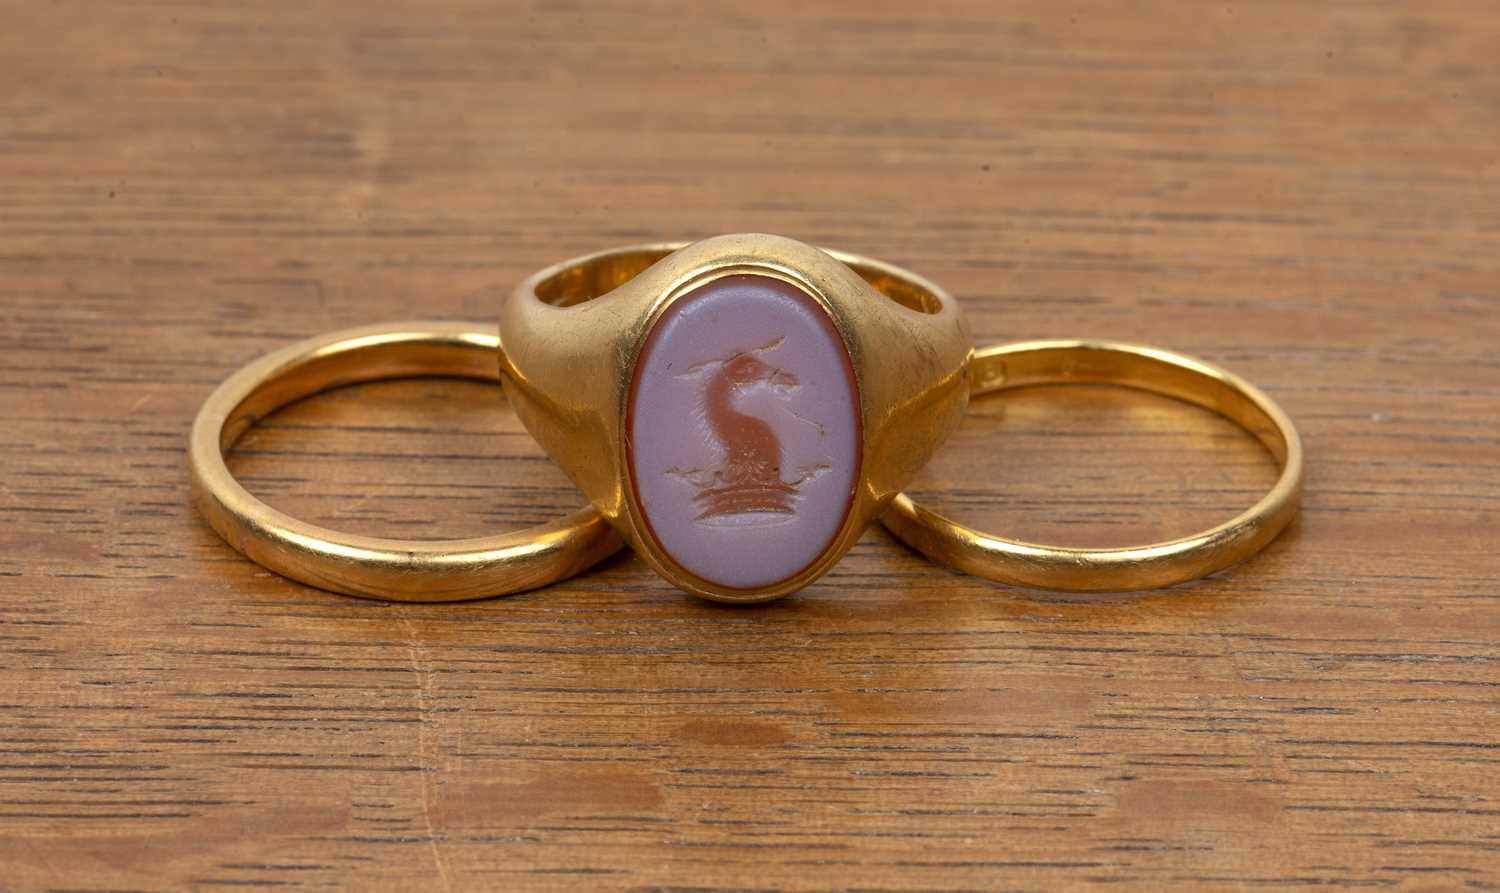 18ct gold ring gents signet ring with intaglio seal, size O/P, 10g approx overall, a 22ct gold plain